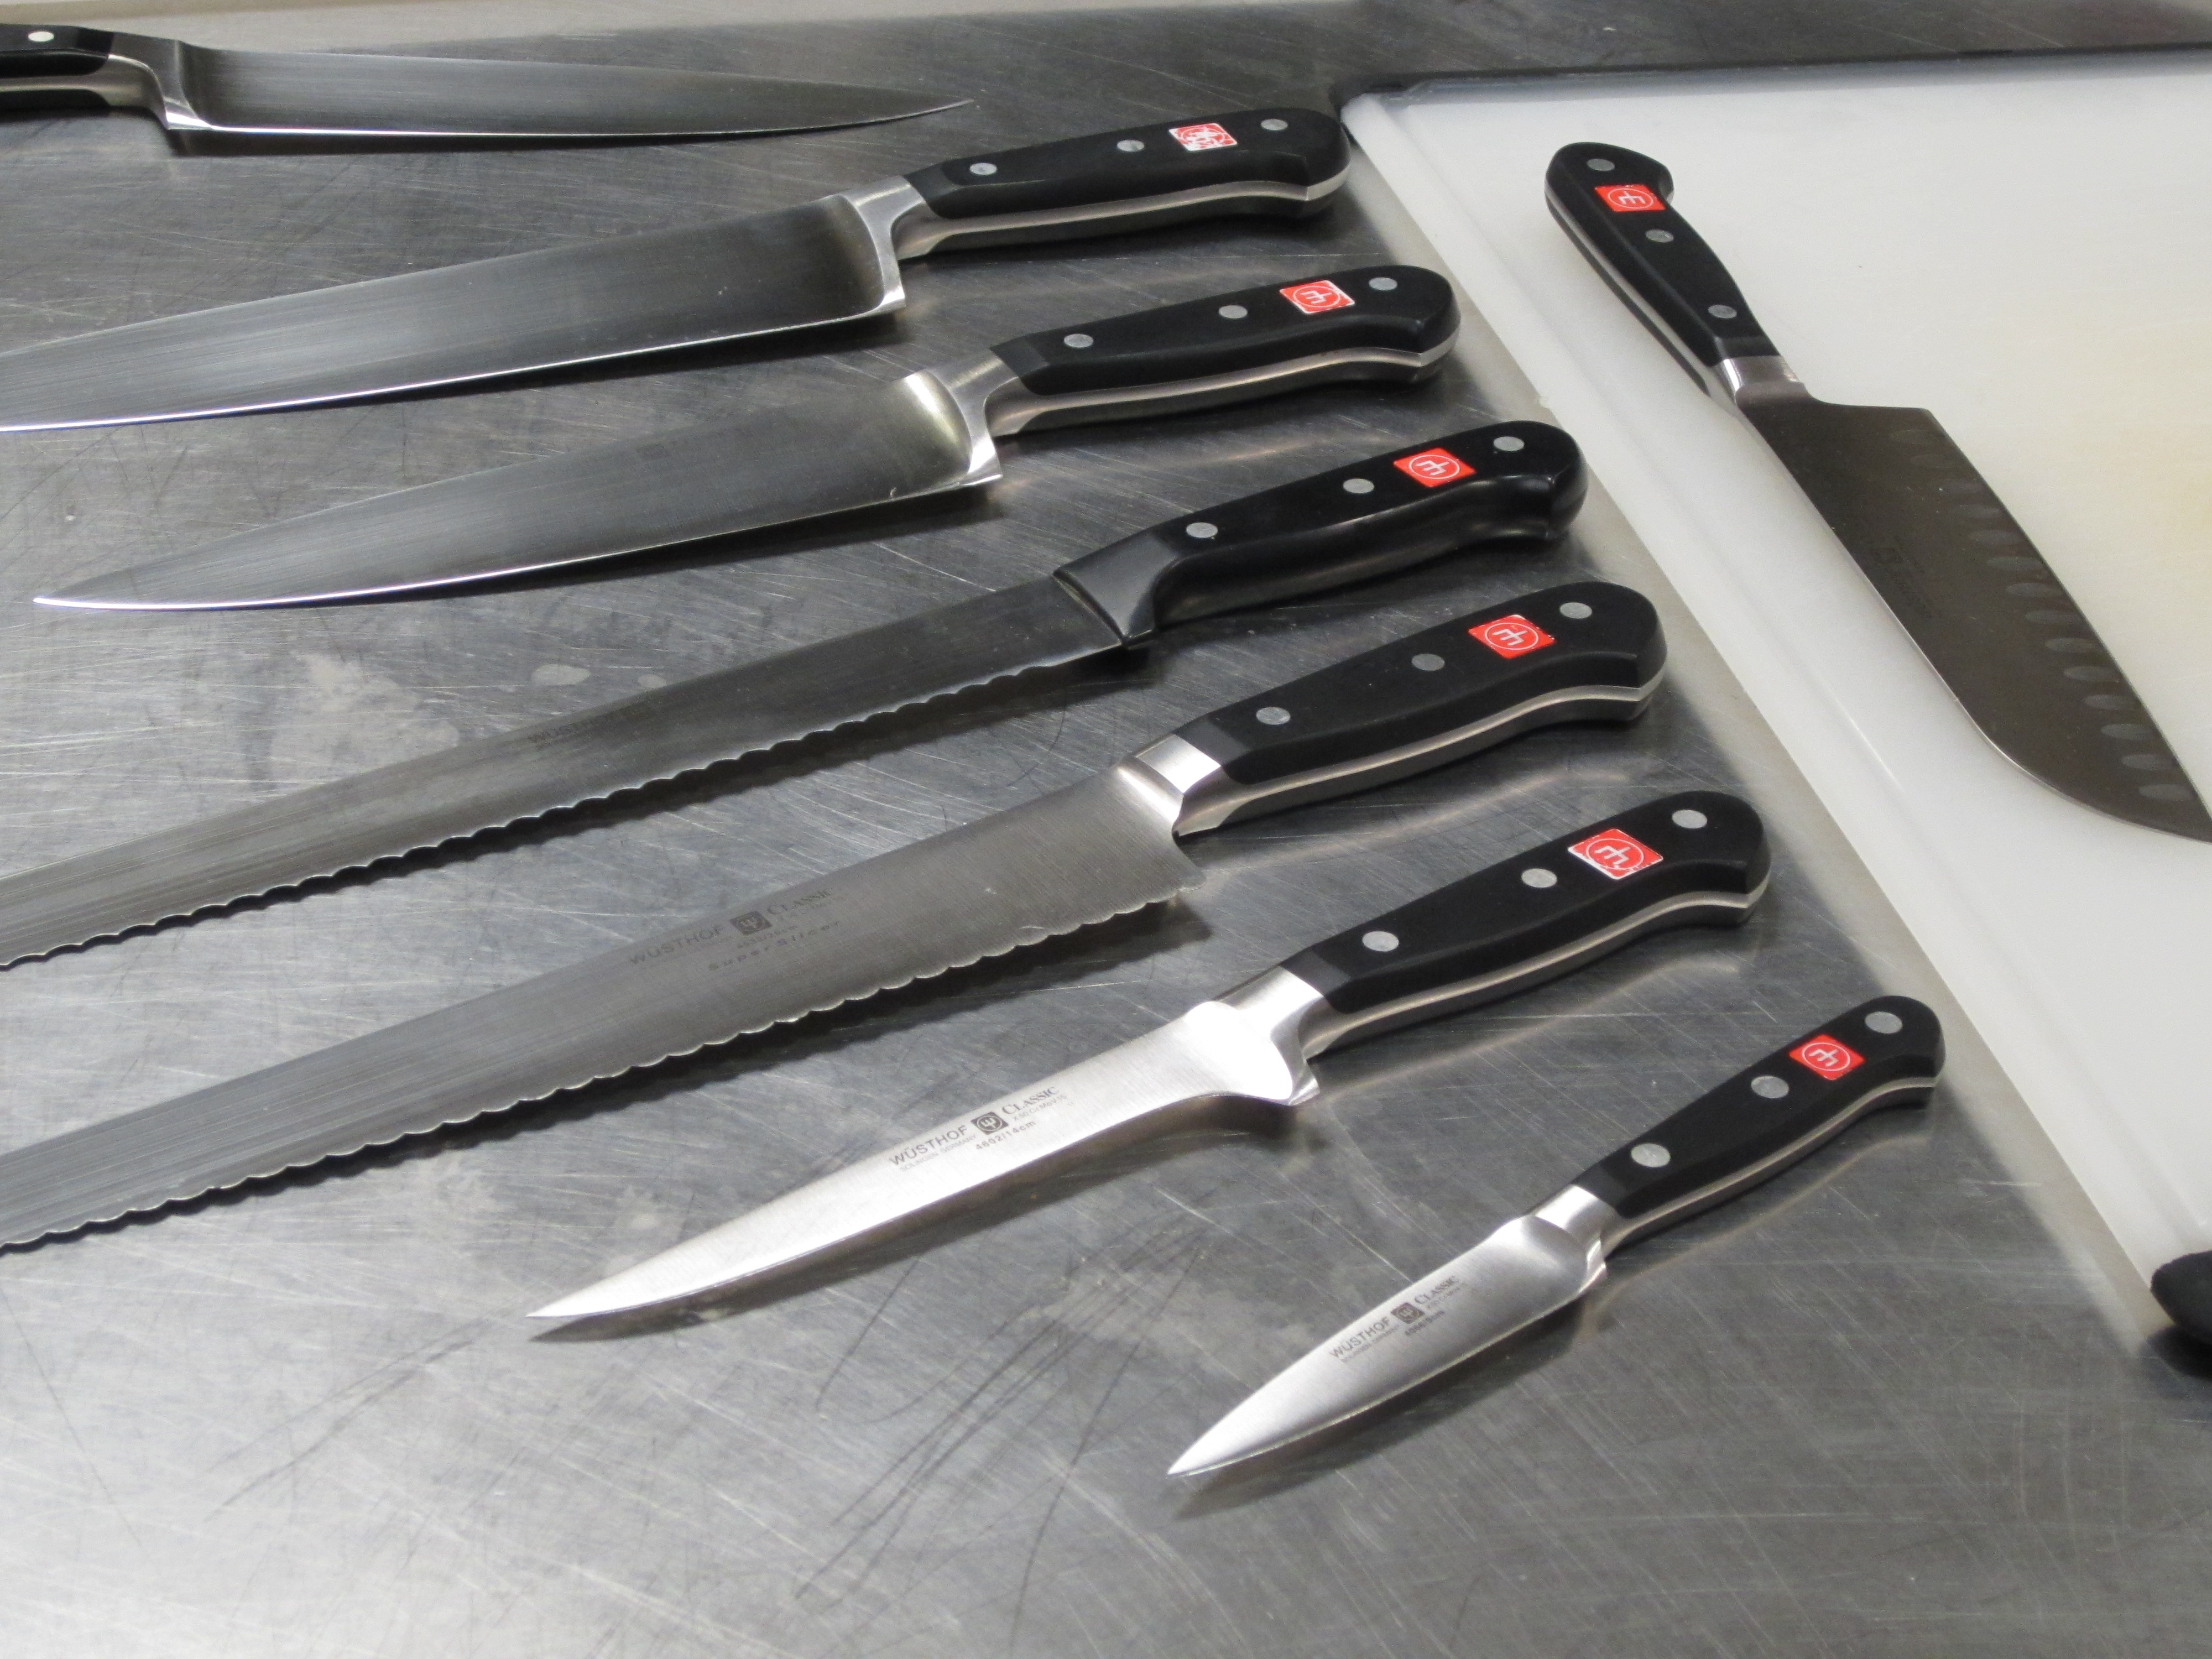 Sharpen your knife skills with Cutco Cutlery